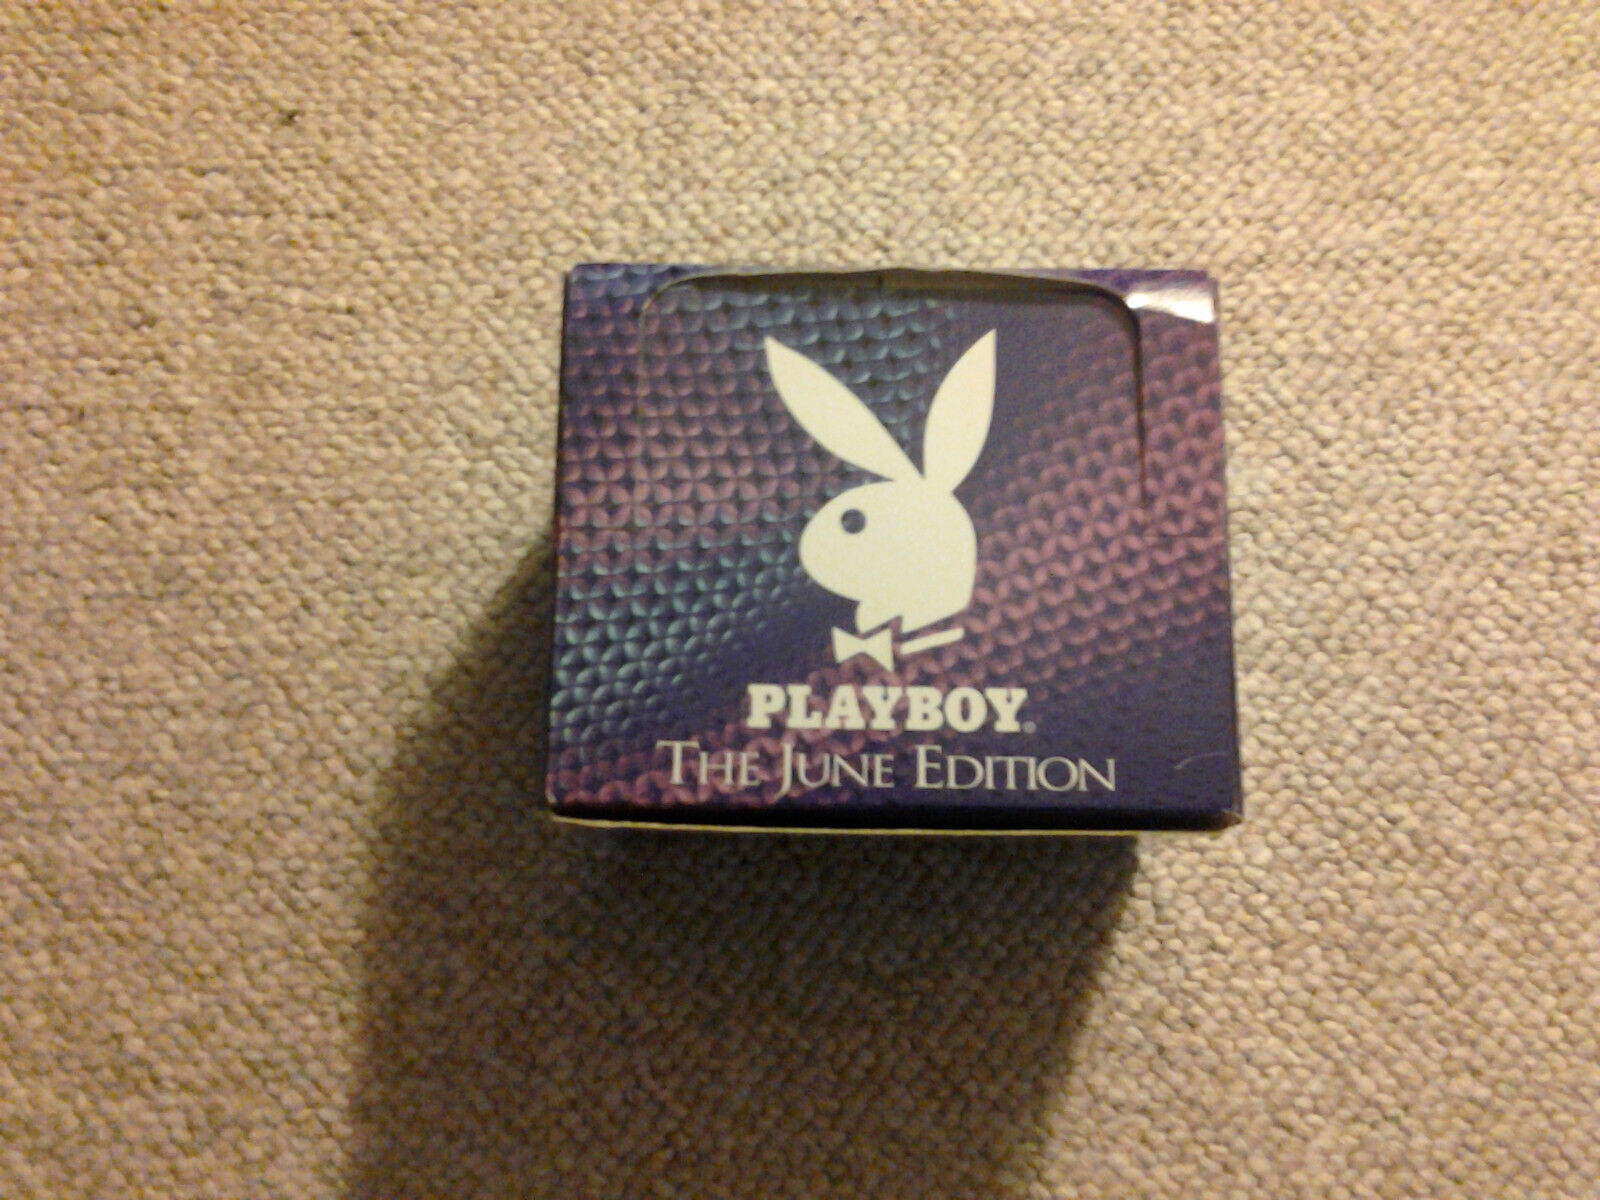 PLAYBOY CENTERFOLD COLLECTOR CARDS JUNE EDITION SINGLES 2 FOR A BUCK NEW LIST